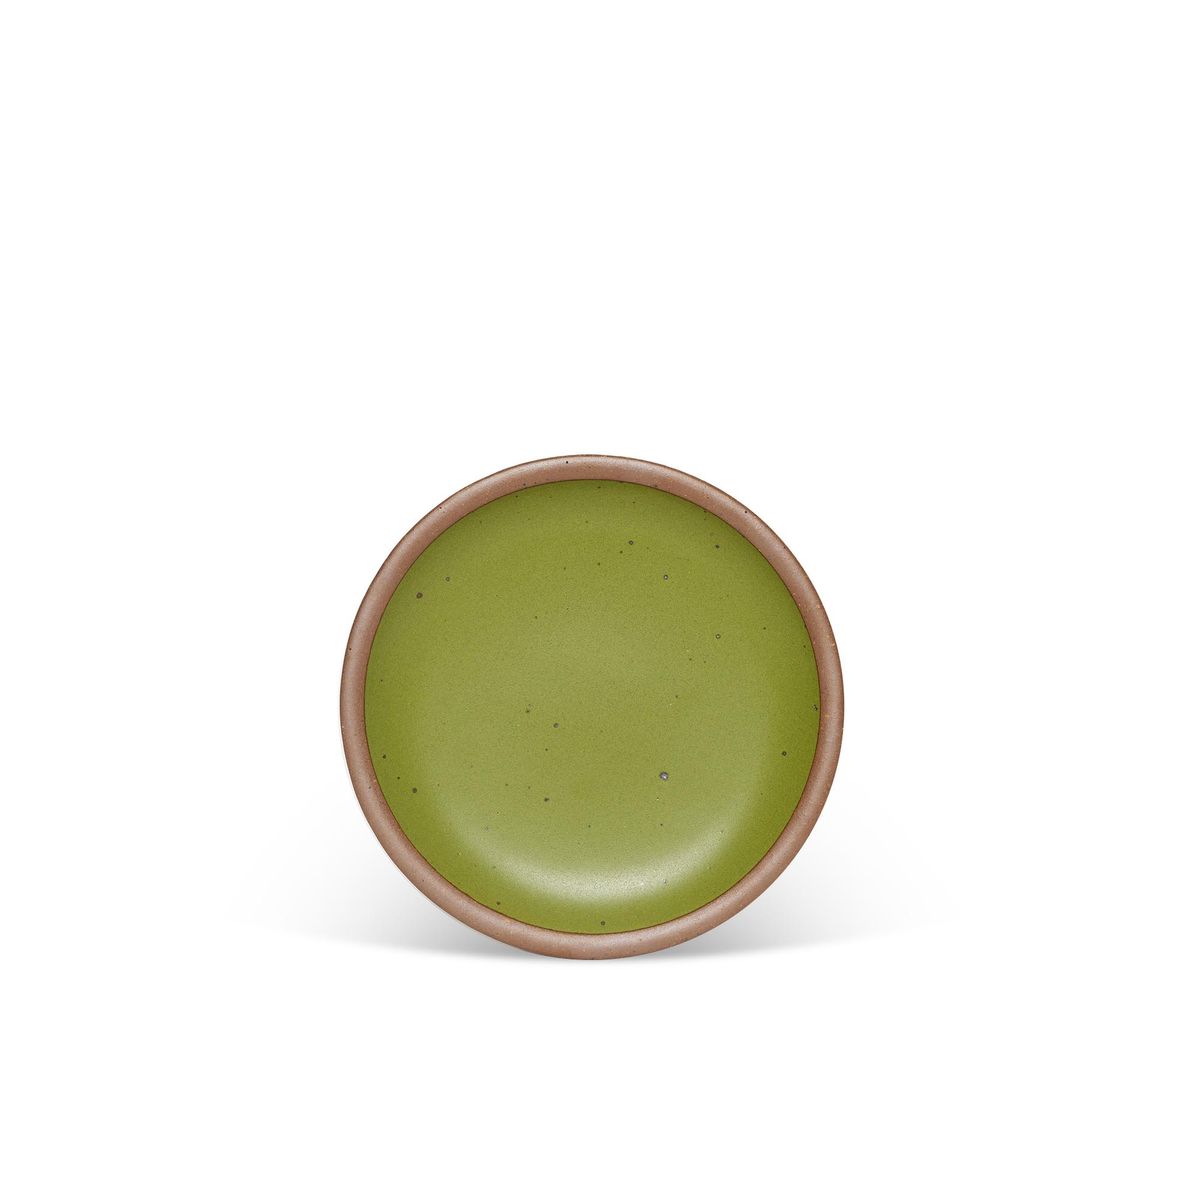 Cake Plate in Fiddlehead - a mossy, olive green.